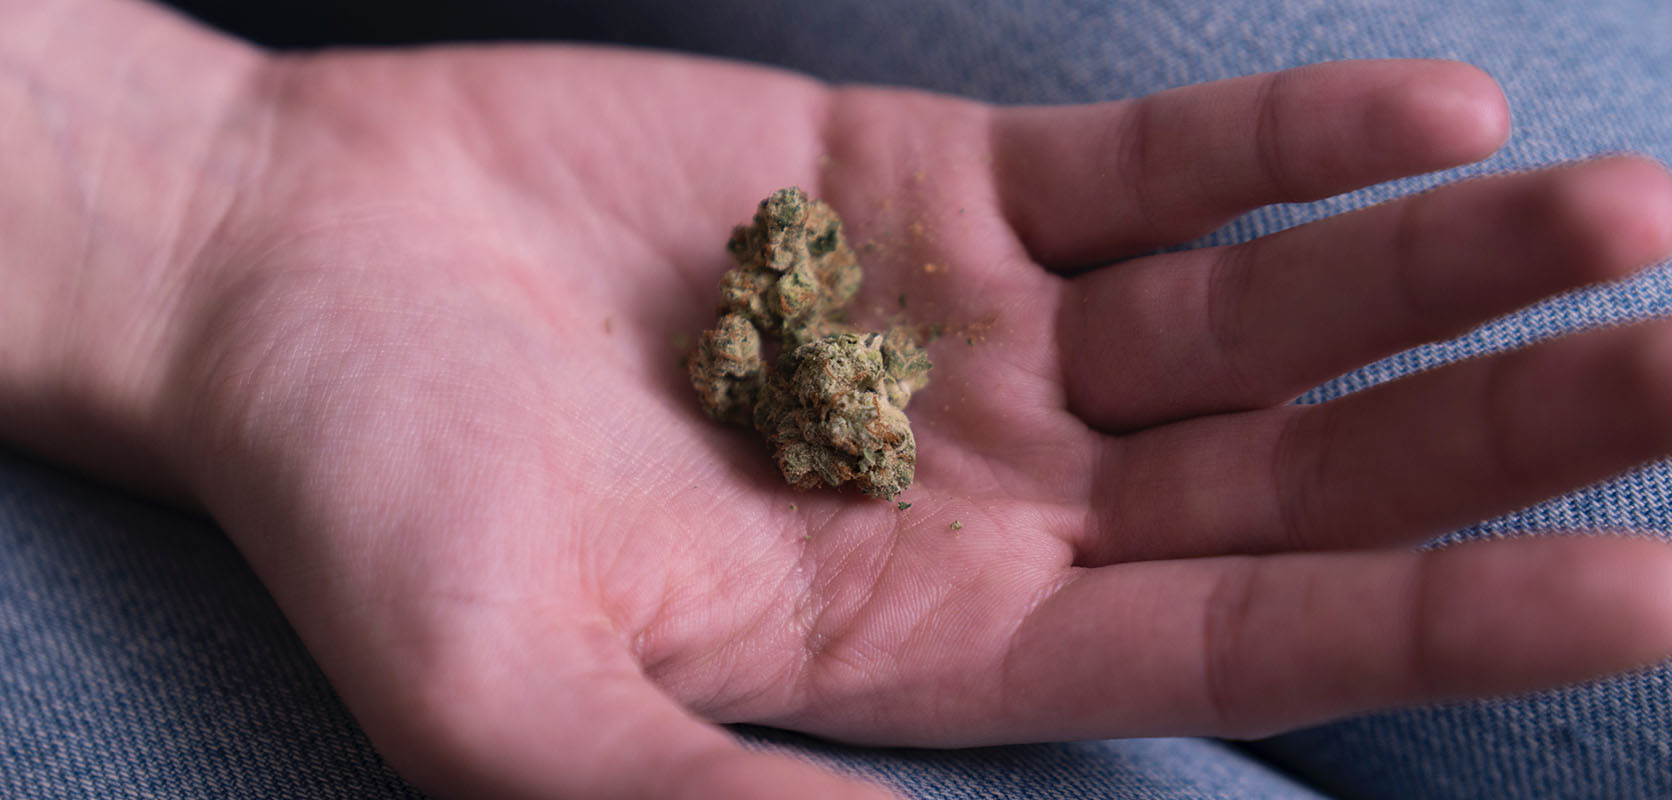 Astro weed bud in a man's hand. Order weed online. Mail order weed.